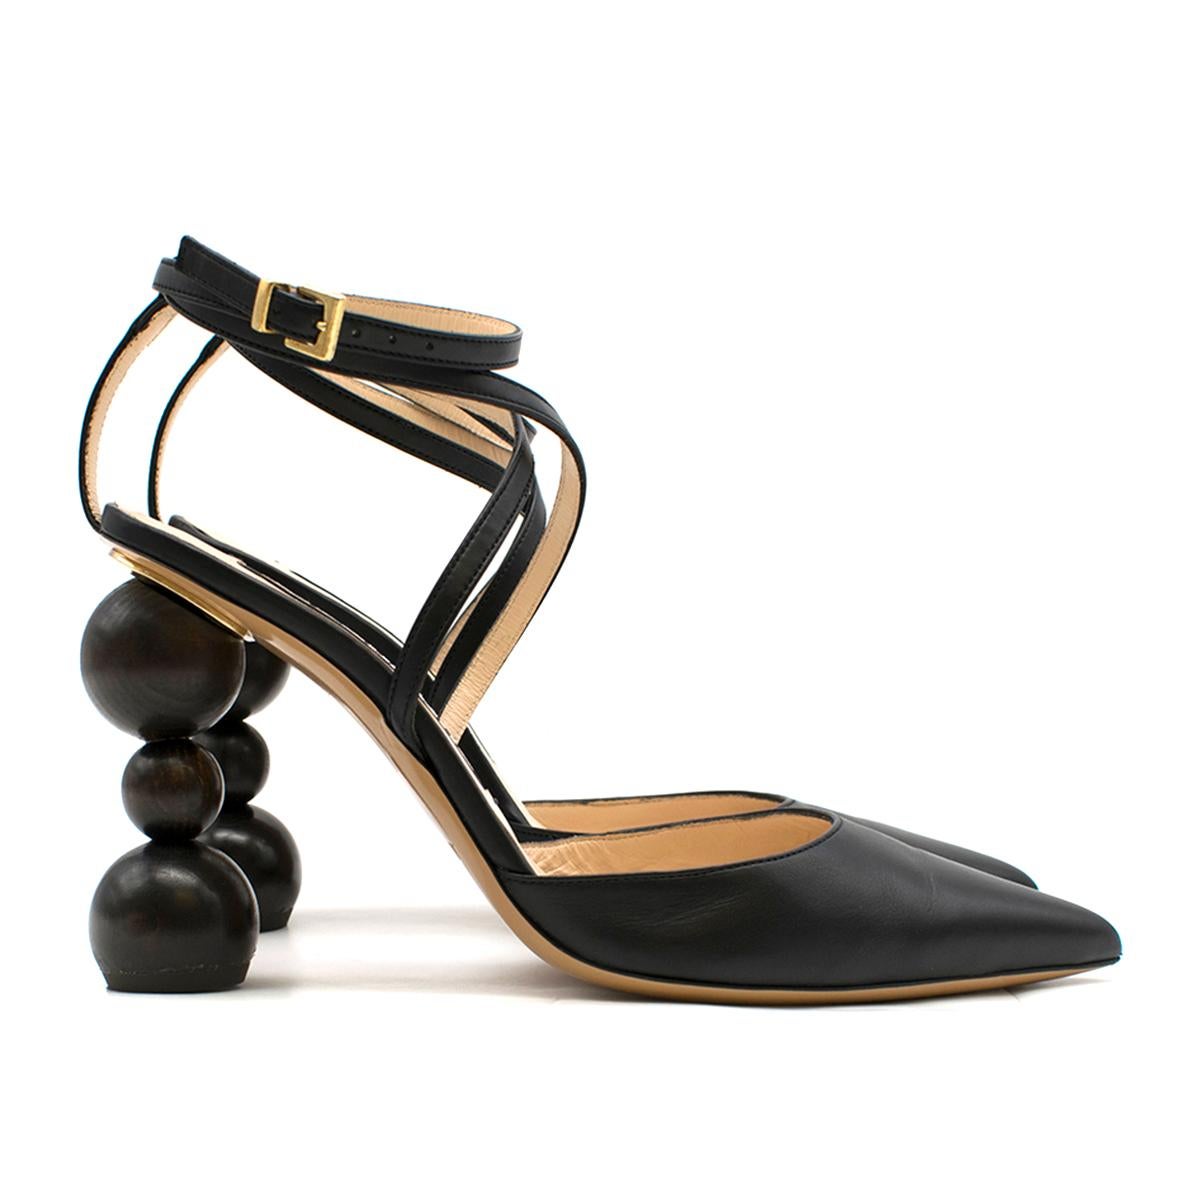 Jacquemus Les chaussures Camil Black Leather Pumps

-Black Leather pumps with geometric heel
- Black leather multilevel straps around ankle
- Pointy toe
- Round geometric heels
- Nude leather insole and sole

Please note, these items are pre-owned